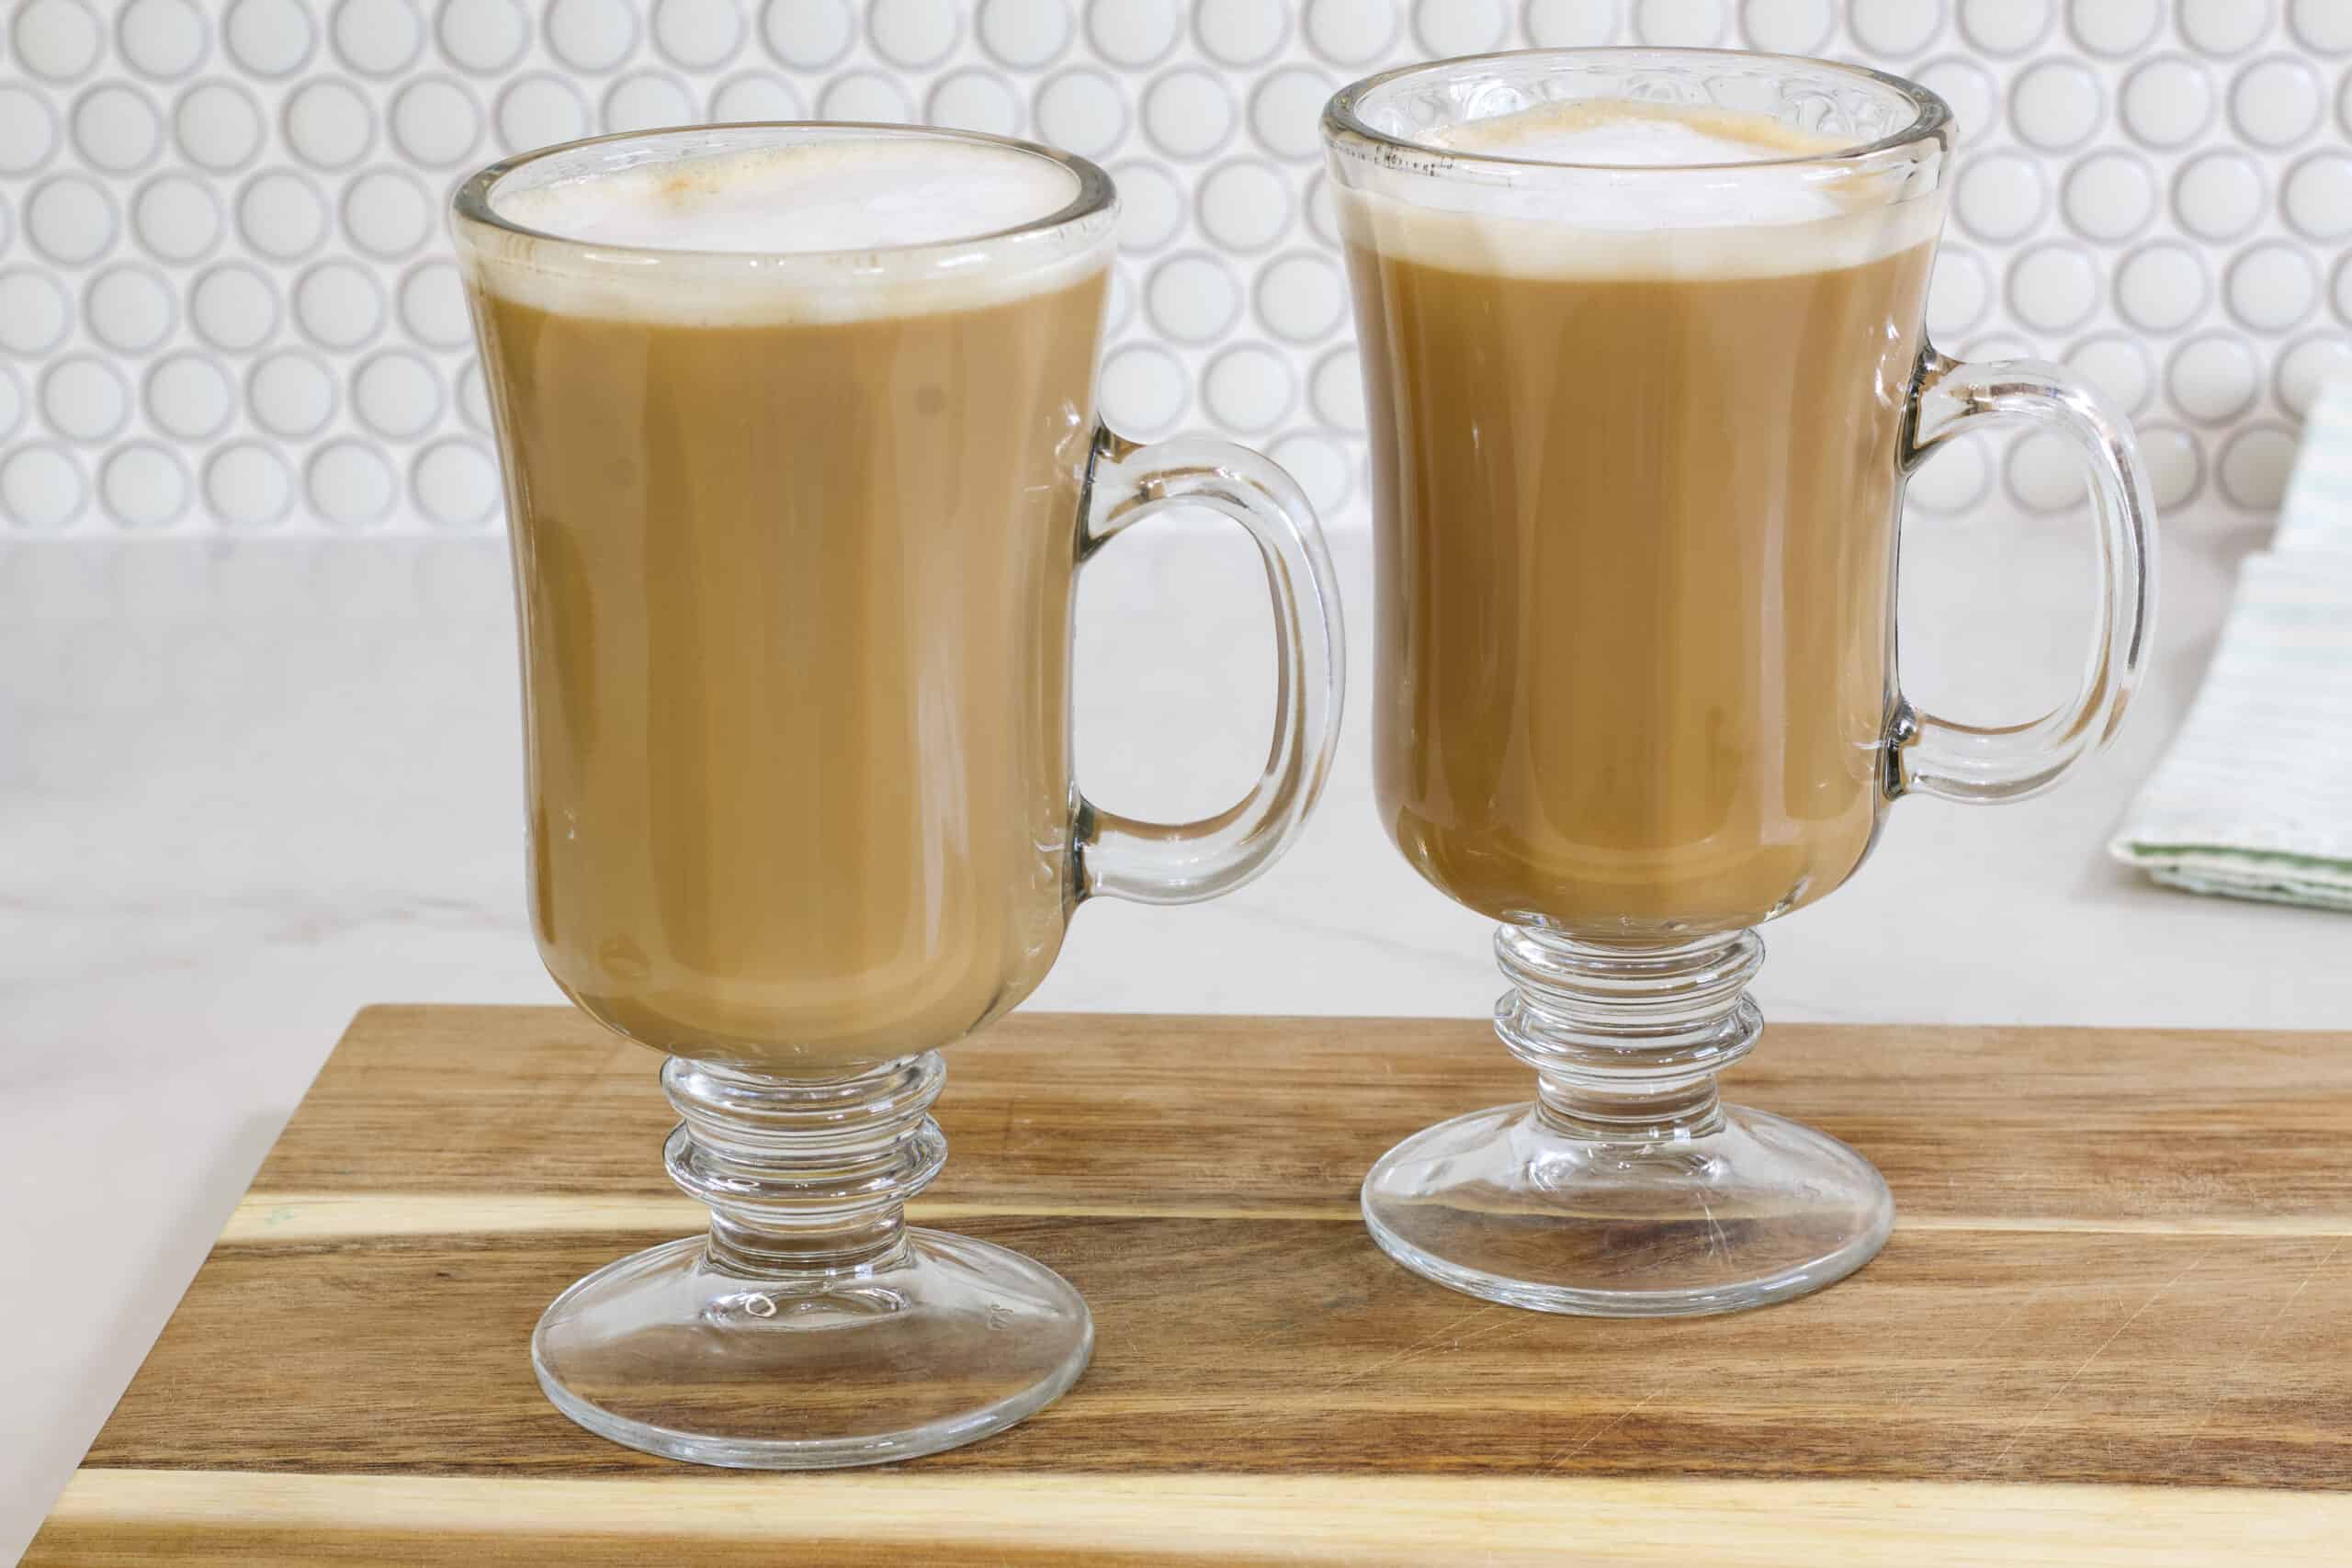 https://www.mindyscookingobsession.com/wp-content/uploads/2023/03/maple-syrup-coffee-recipe-hot-or-iced-2-scaled.jpg